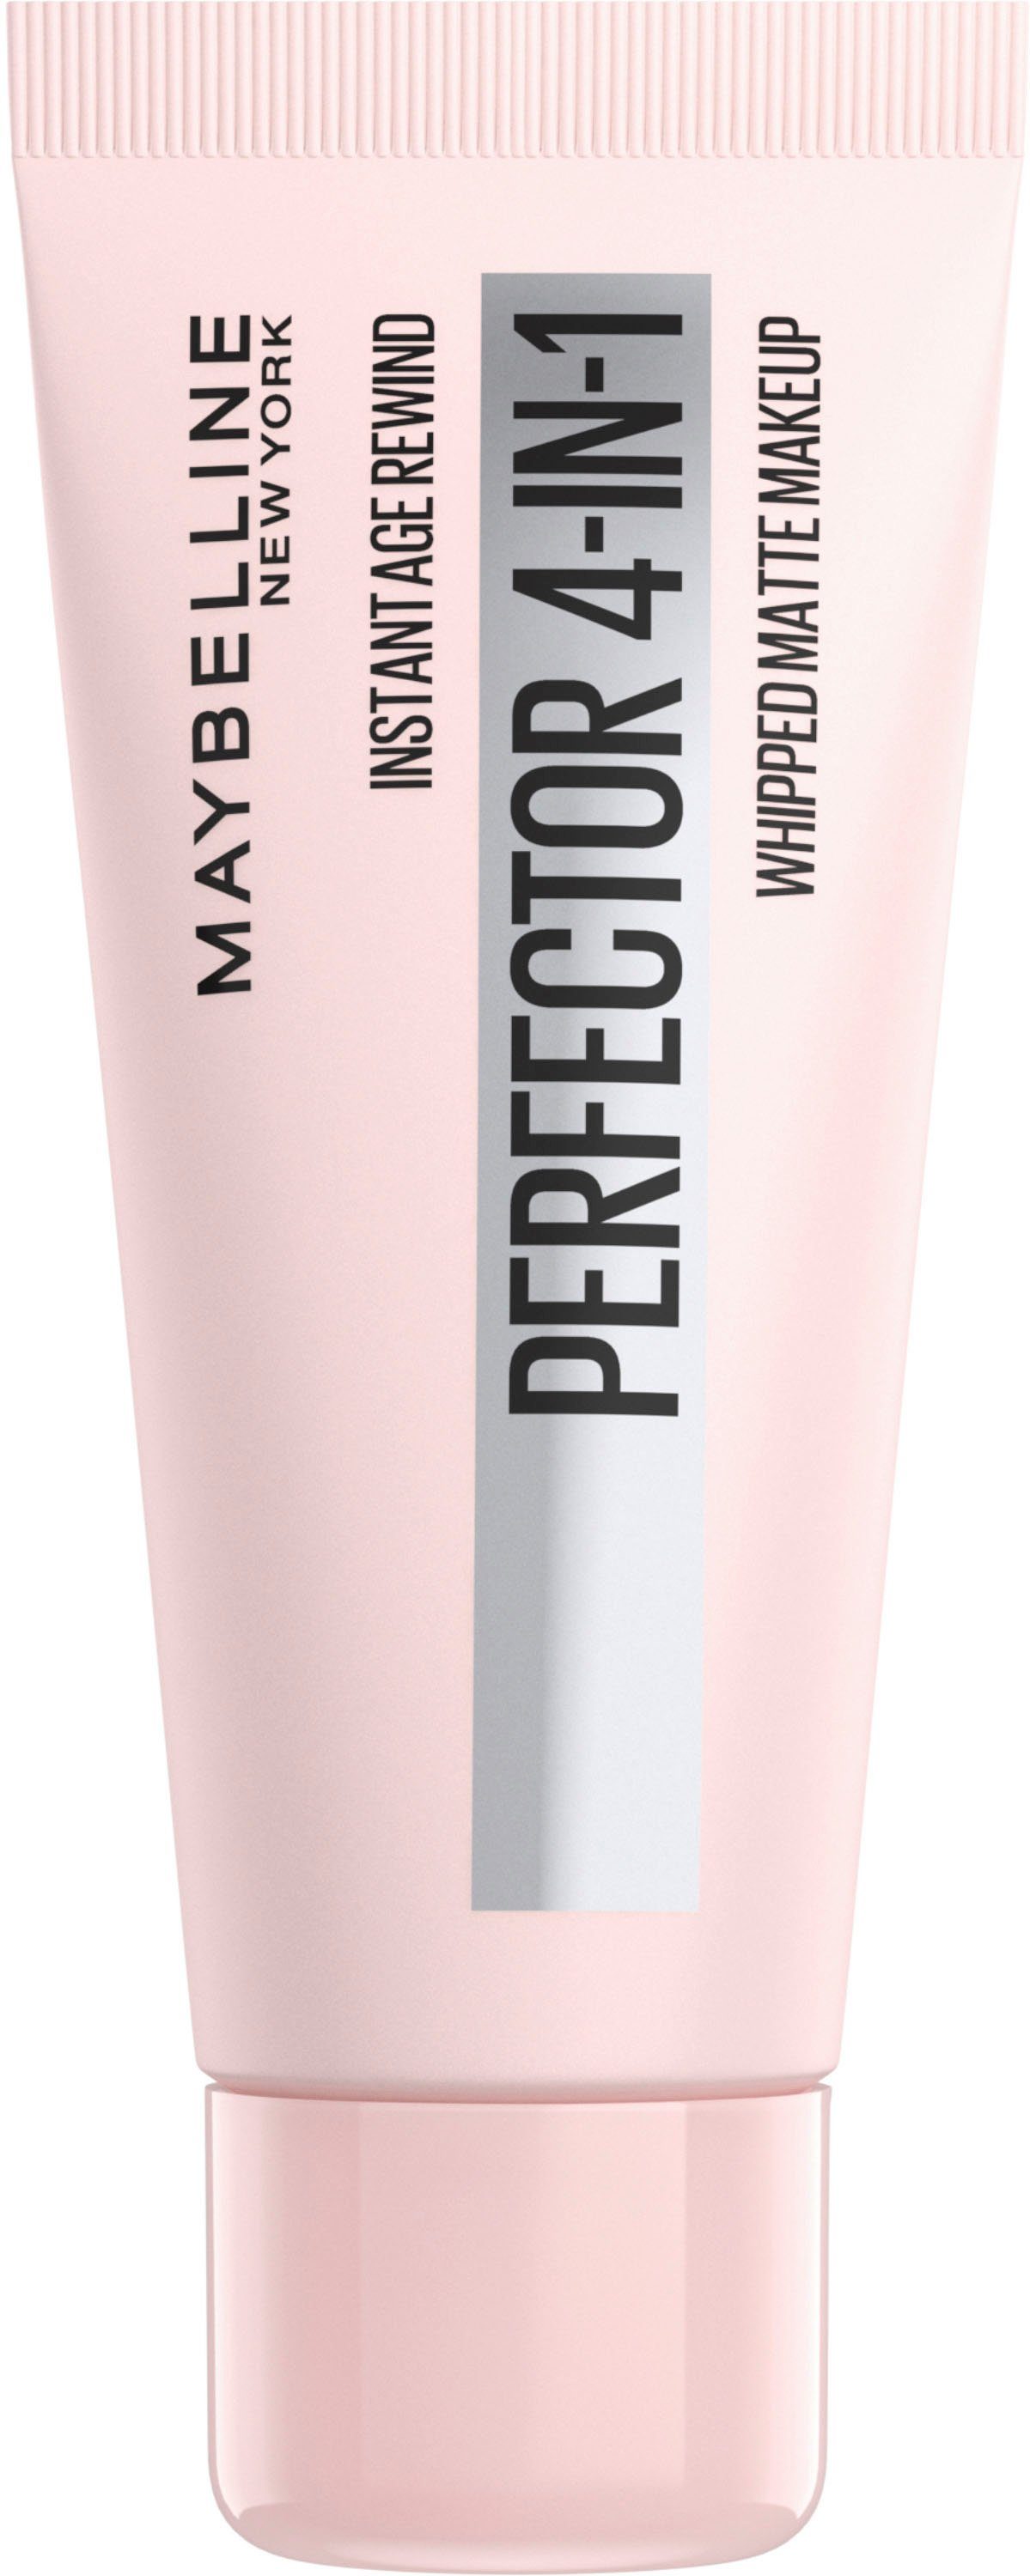 MAYBELLINE NEW Perfector Instant 1 Light YORK Matte Foundation